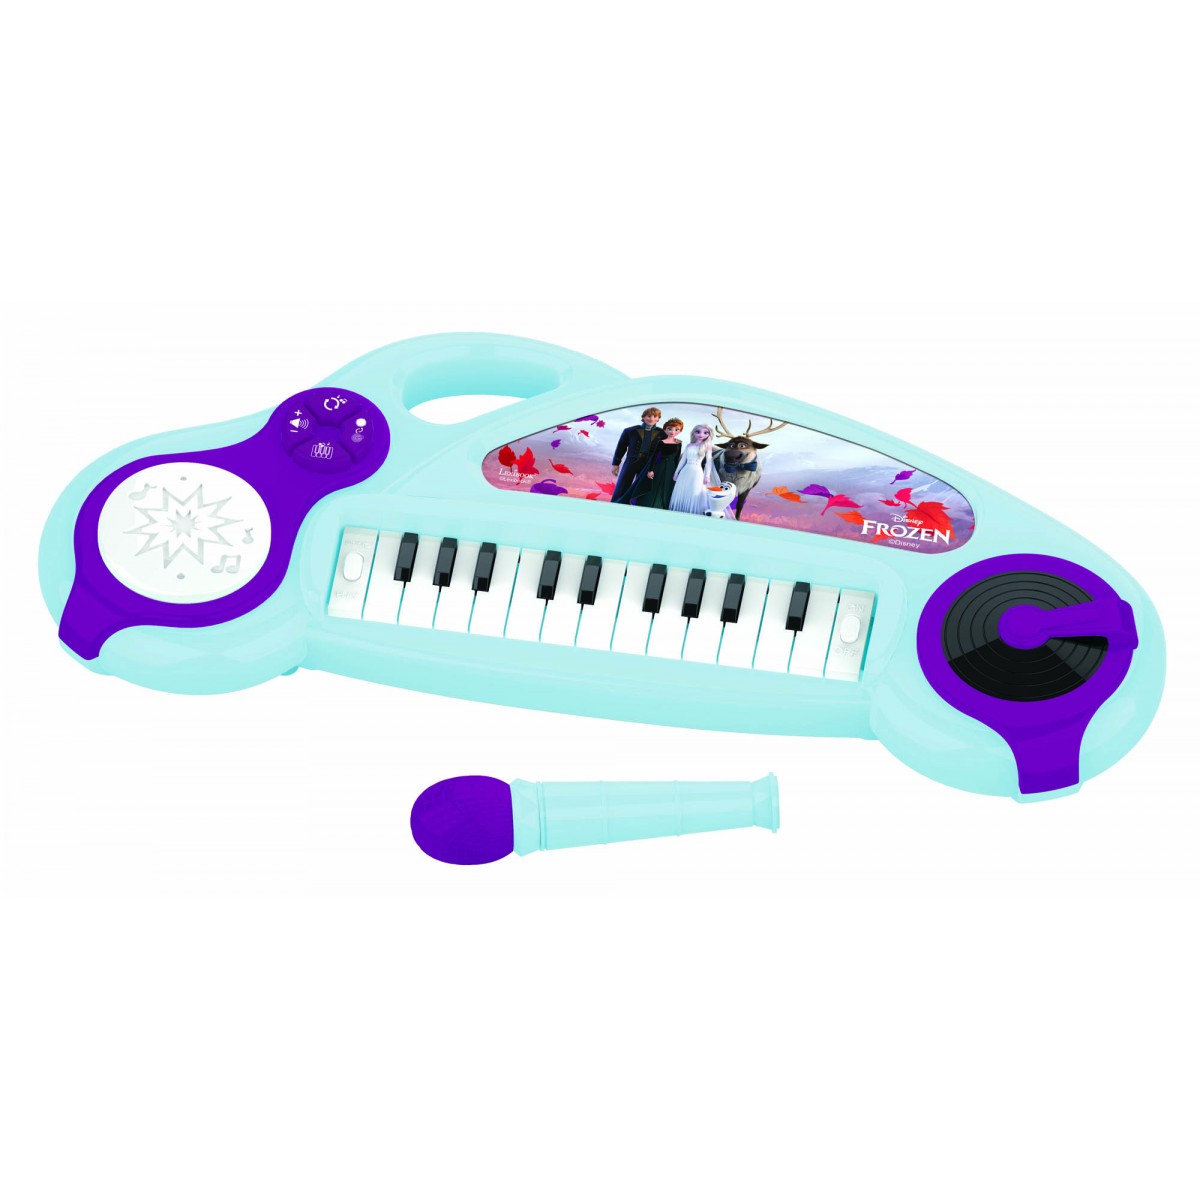 Frozen Electronic piano for children with light effects